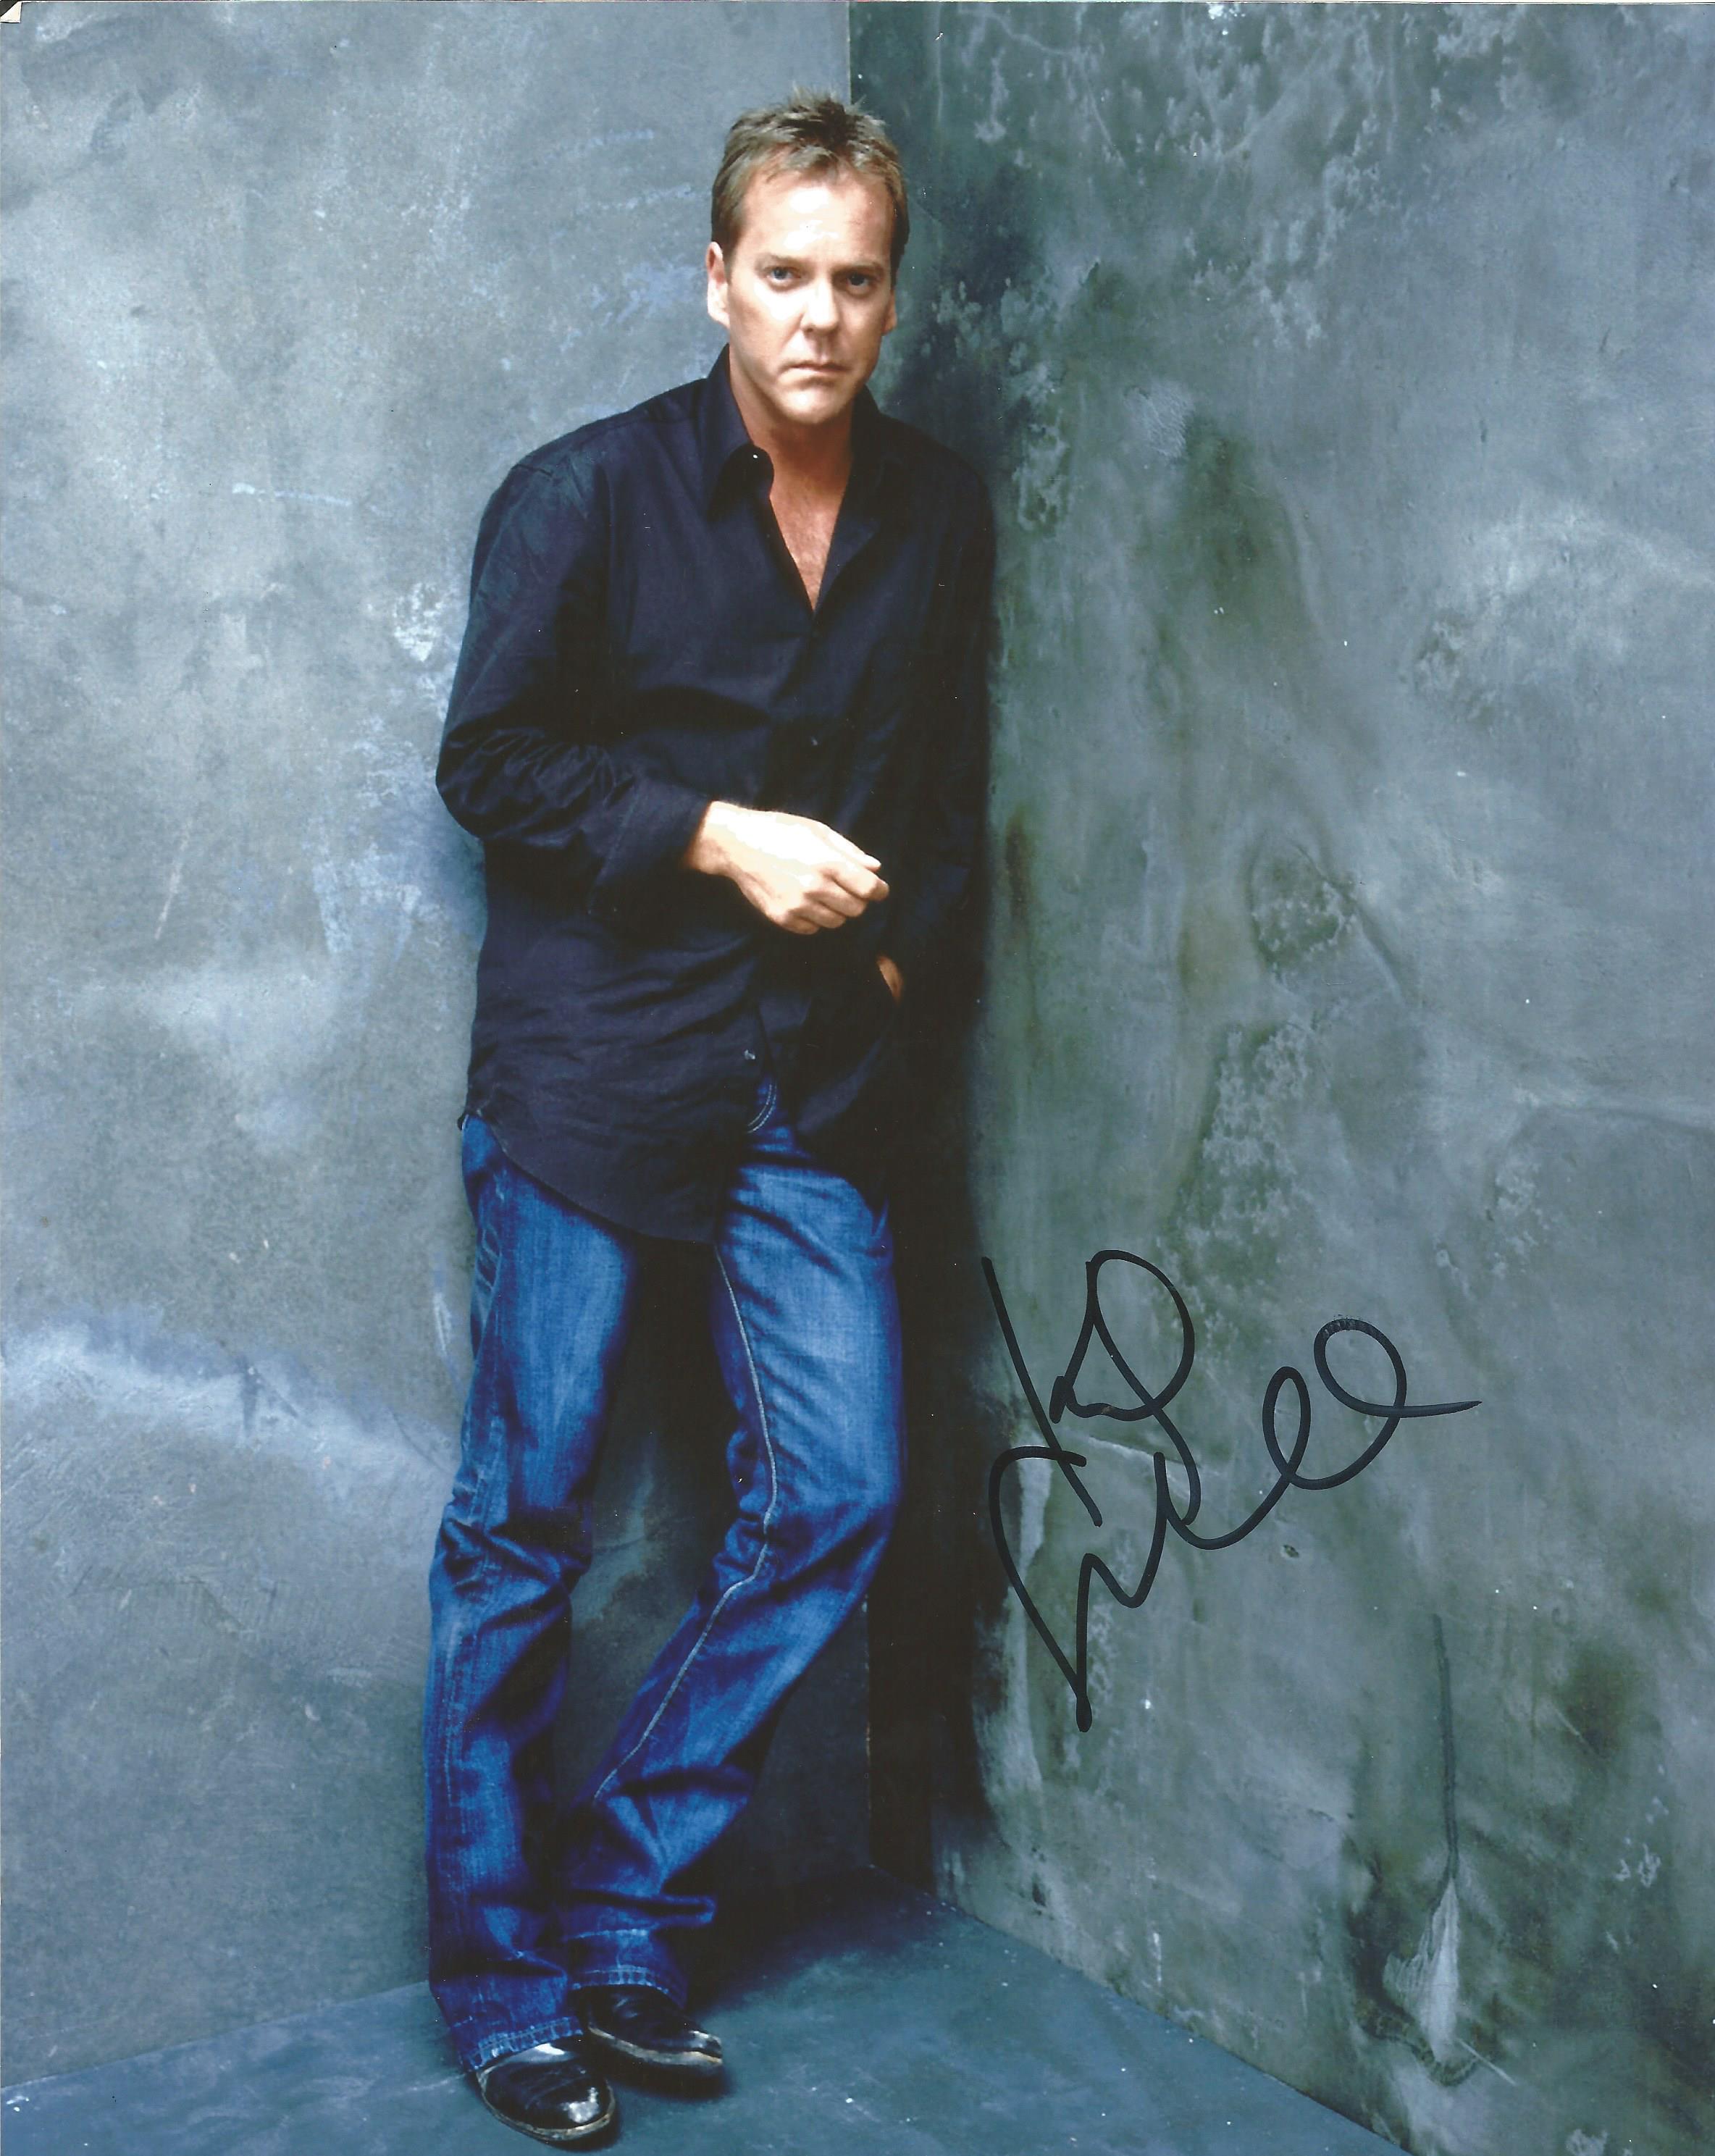 Kiefer Sutherland signed 10 x 8 colour Photoshoot Portrait Photo, from in person collection